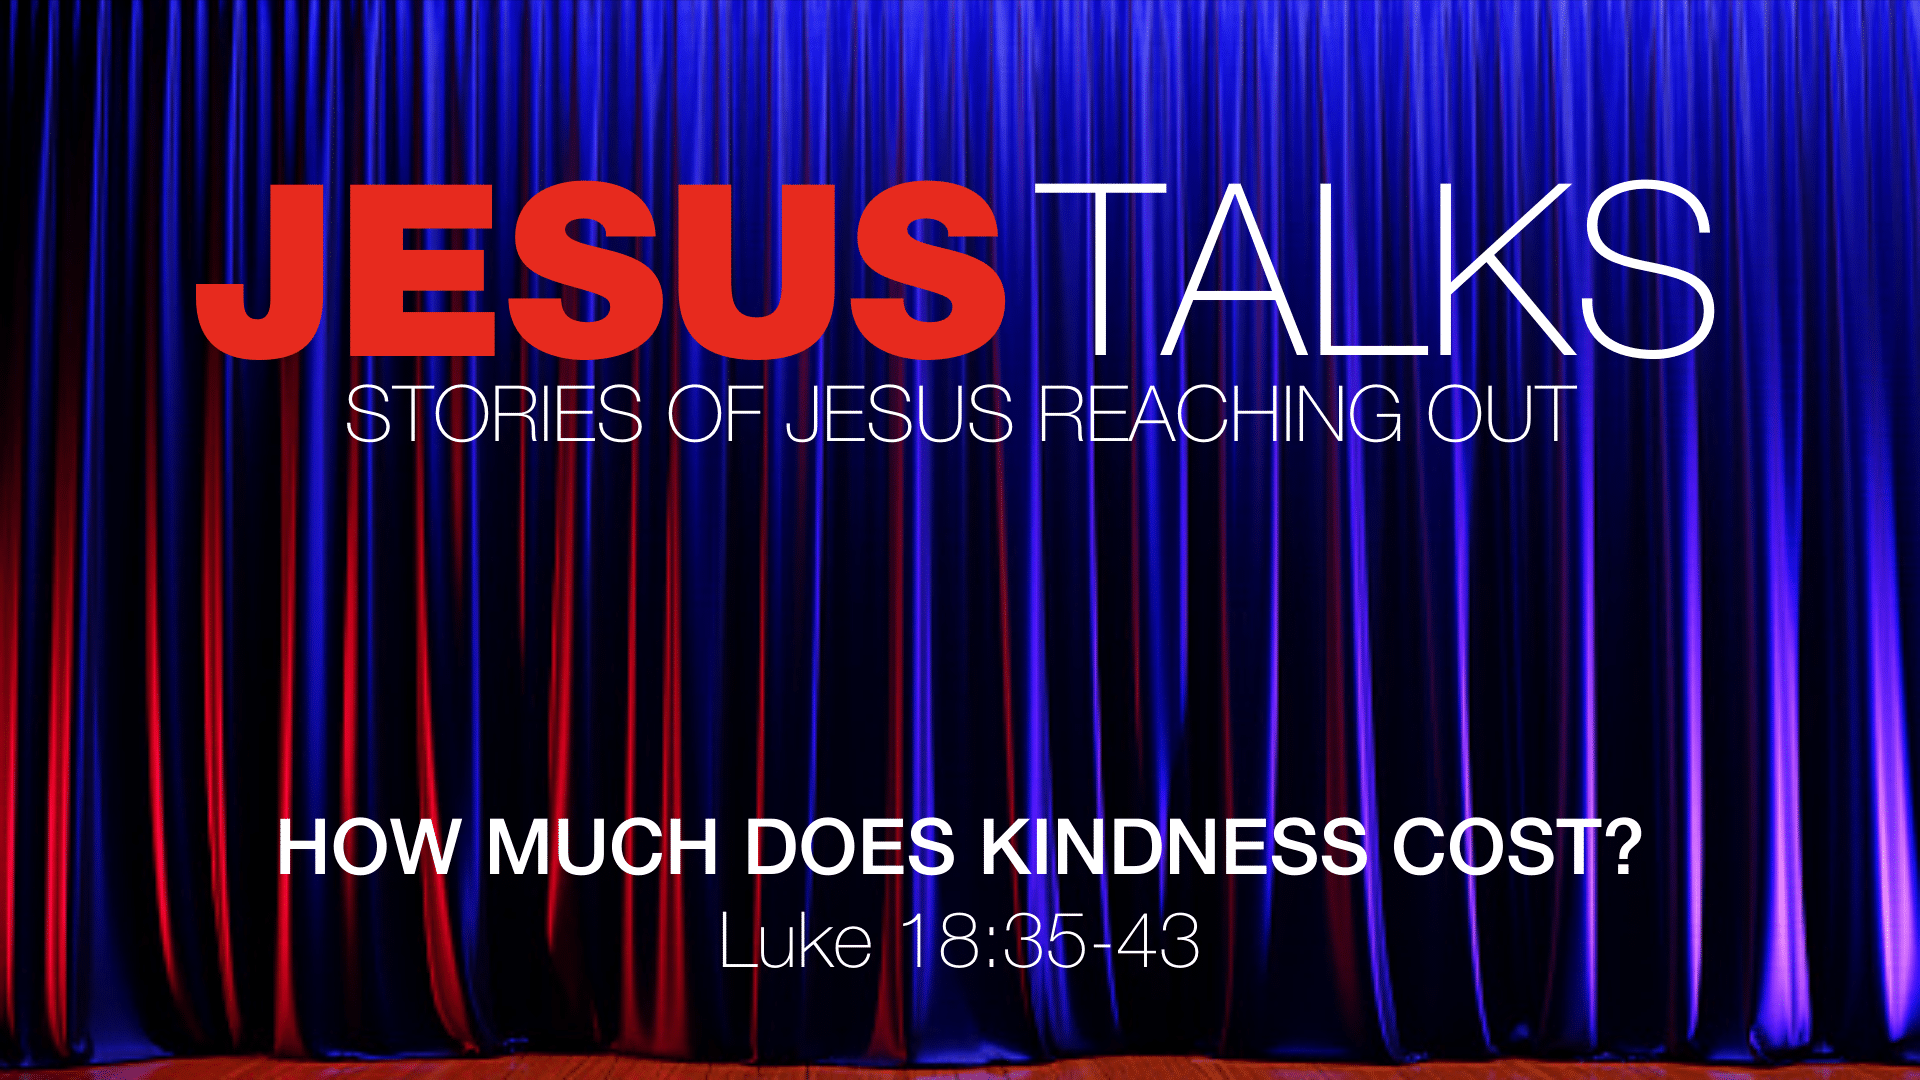 Jesus Talks: How Much Does Kindness Cost?